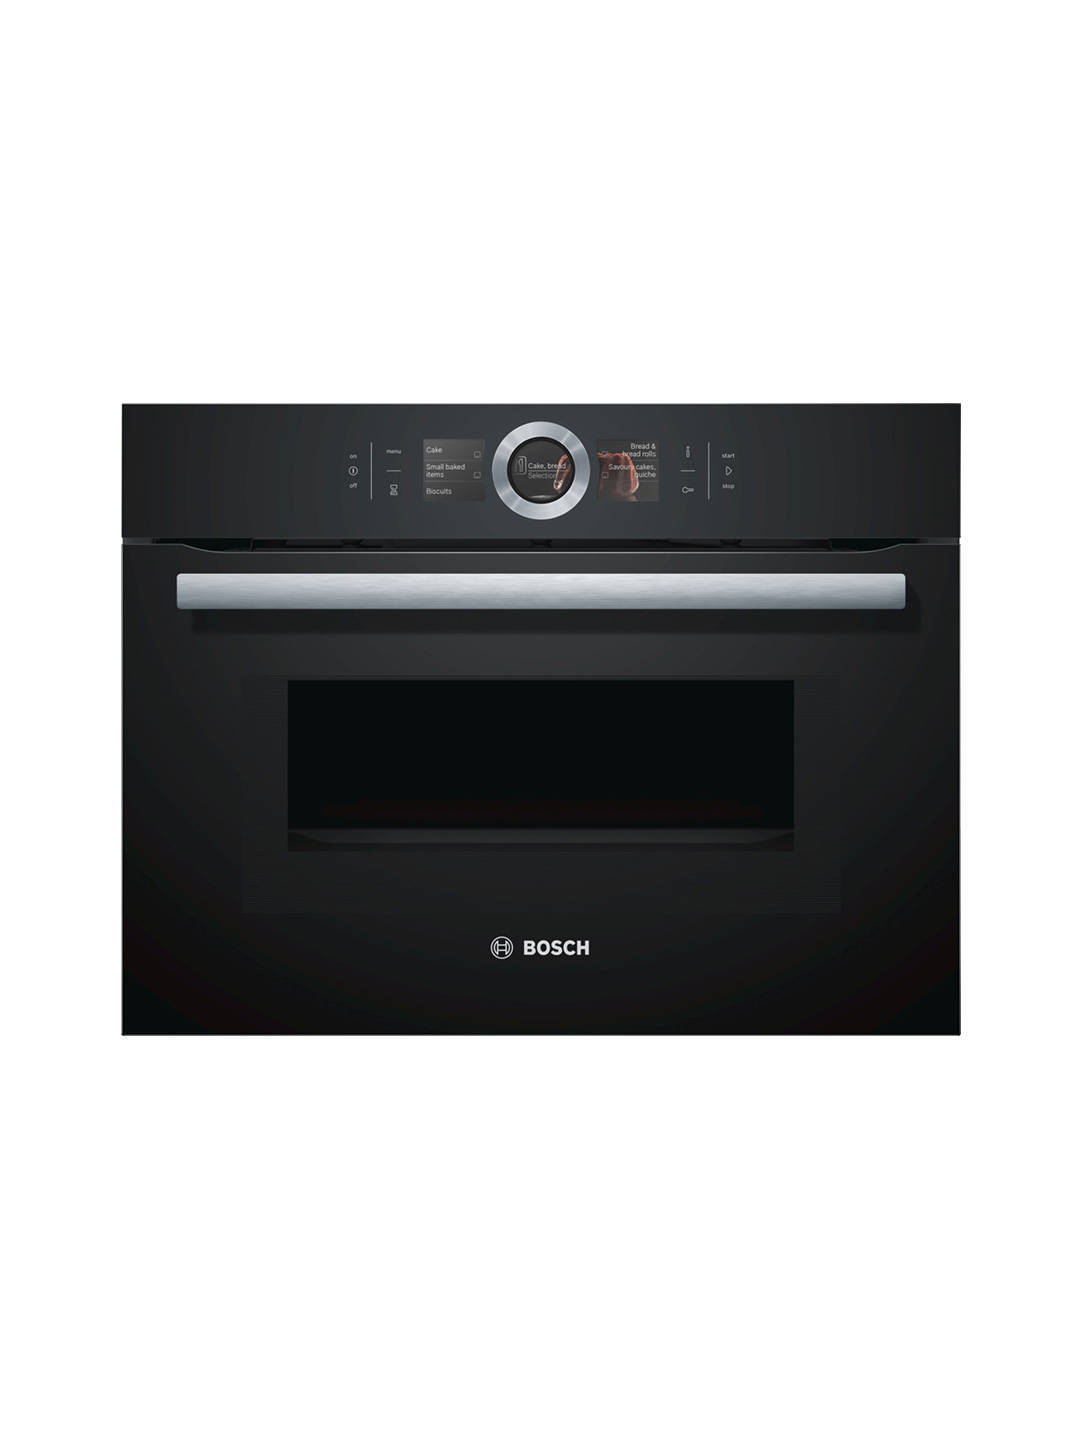 Bosch Microwave Oven Combo User Manual